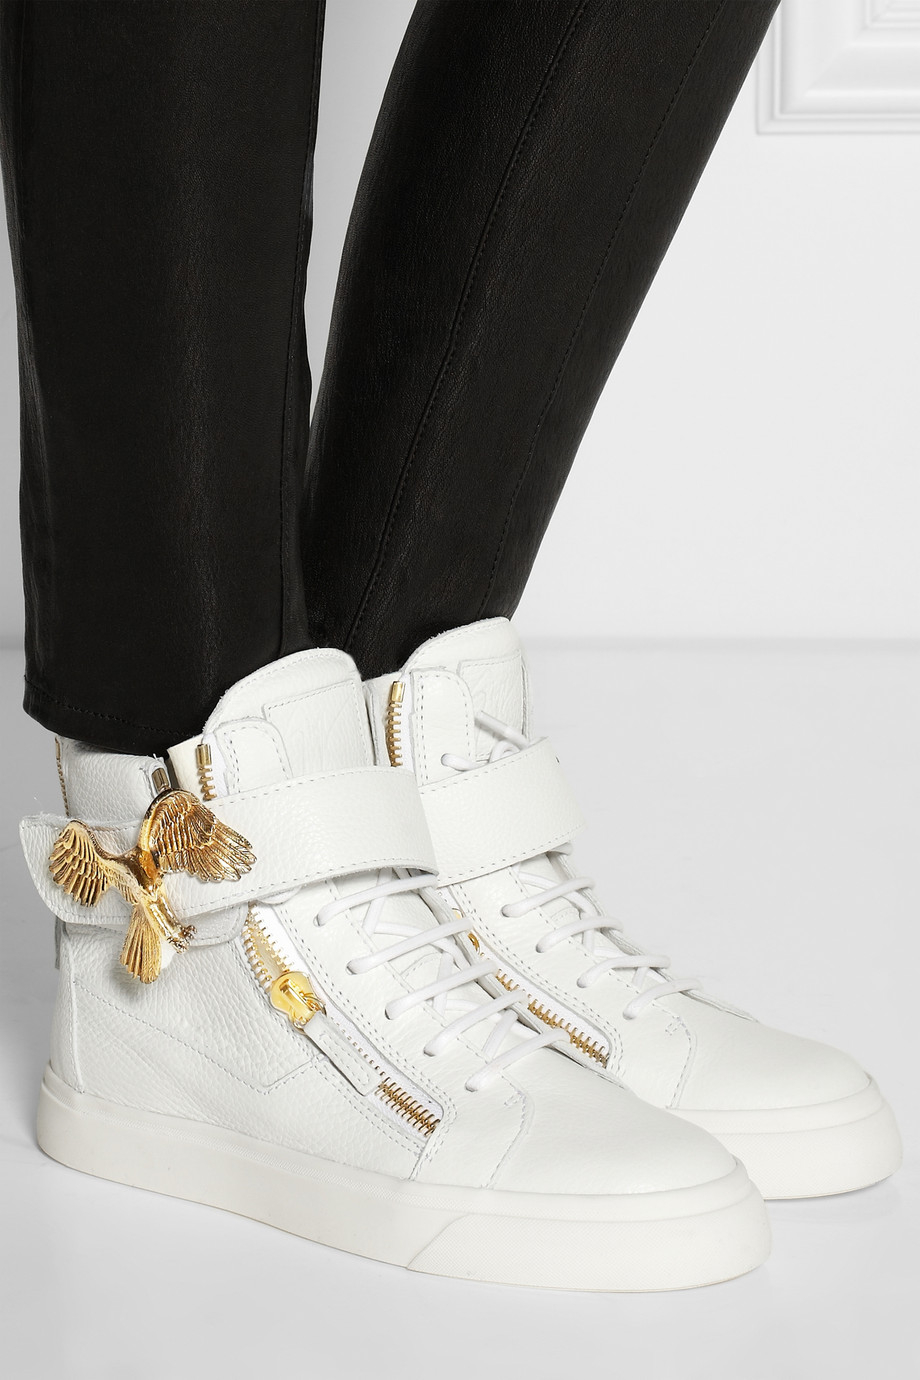 Giuseppe Zanotti London Textured-Leather High-Top Sneakers in White - Lyst